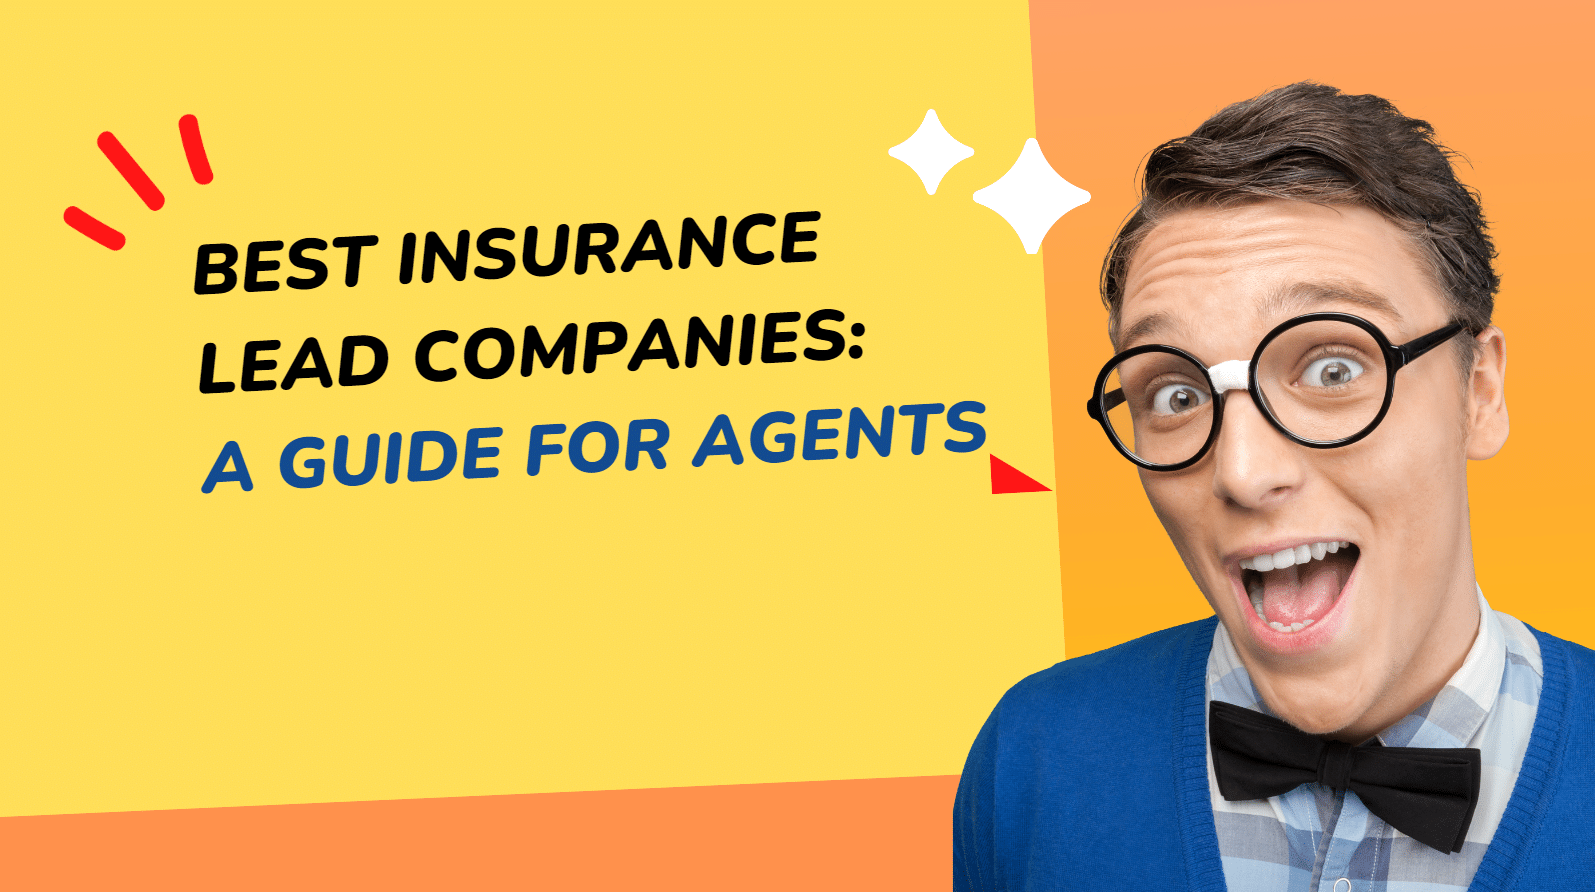 Best Insurance Lead Companies: A Guide For Agents